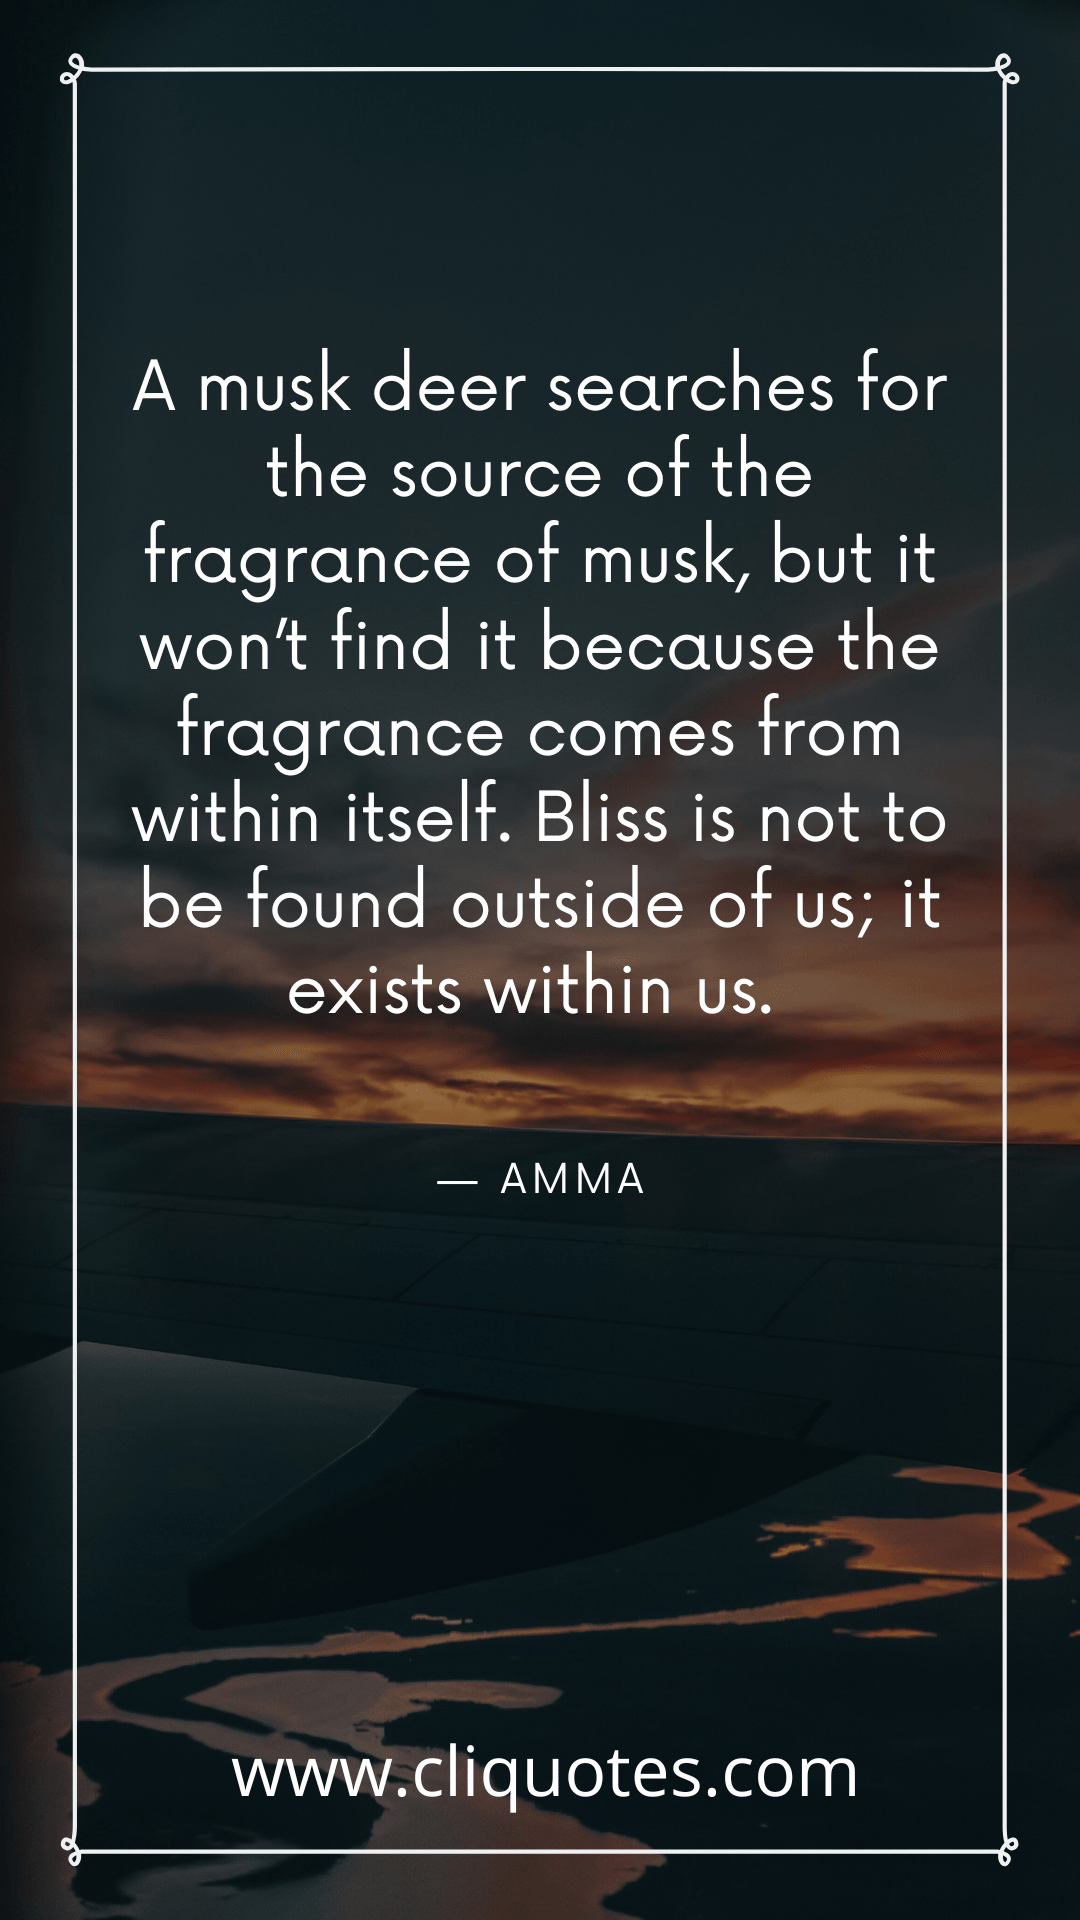 A musk deer searches for the source of the fragrance of musk, but it won’t find it because the fragrance comes from within itself. Bliss is not to be found outside of us; it exists within us. — AMMA